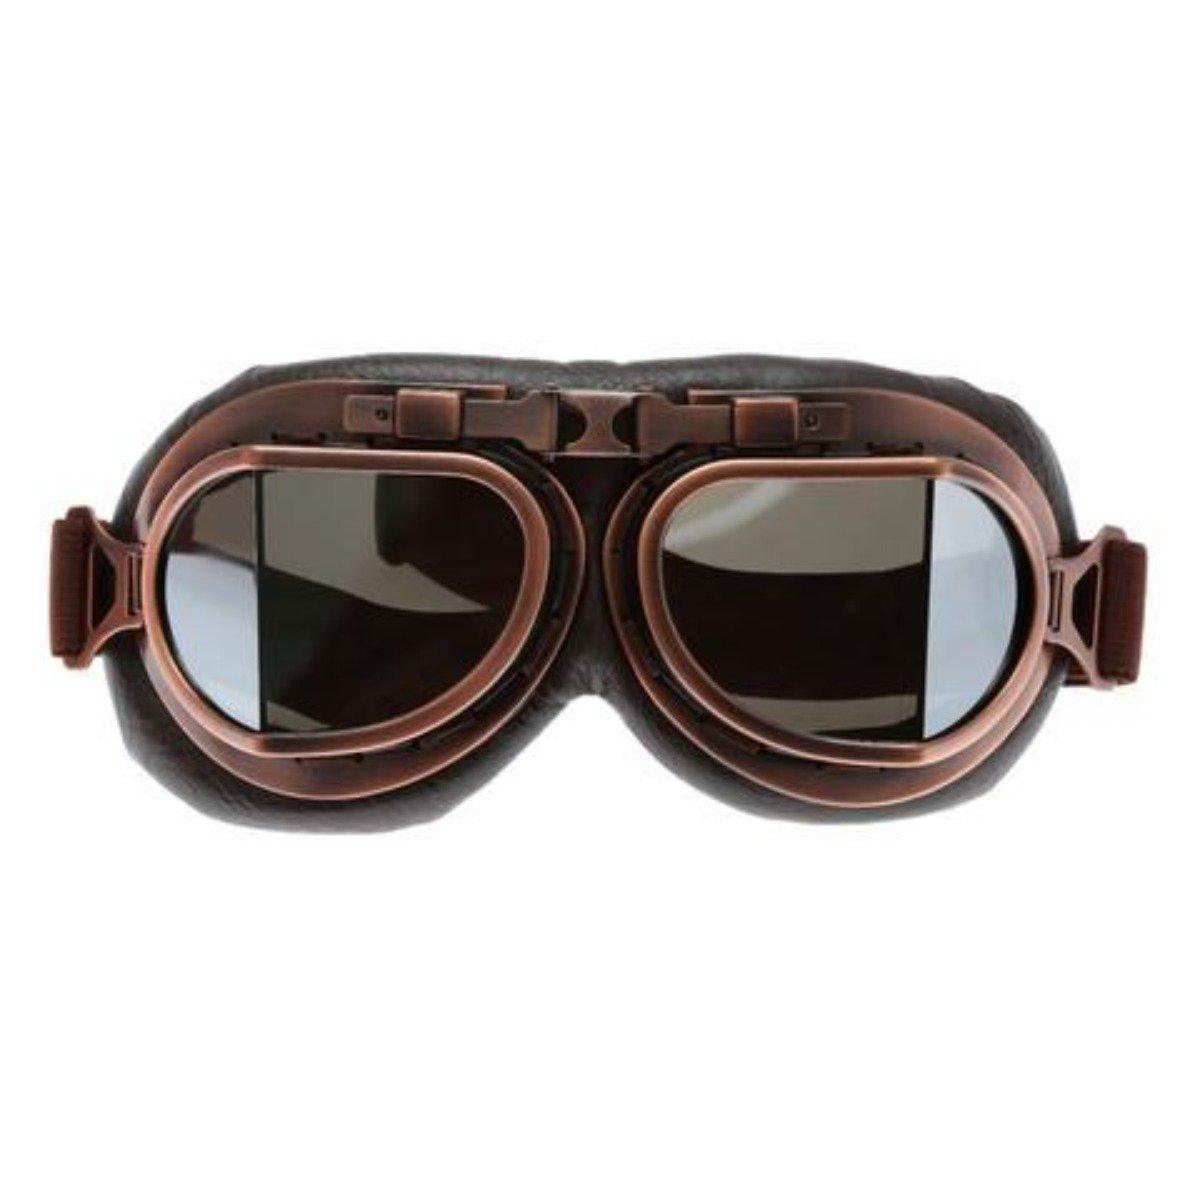 Vintage Aviator Motorcycle Goggles, One Size, Copper Color Frame, Brown Lens - American Legend Rider